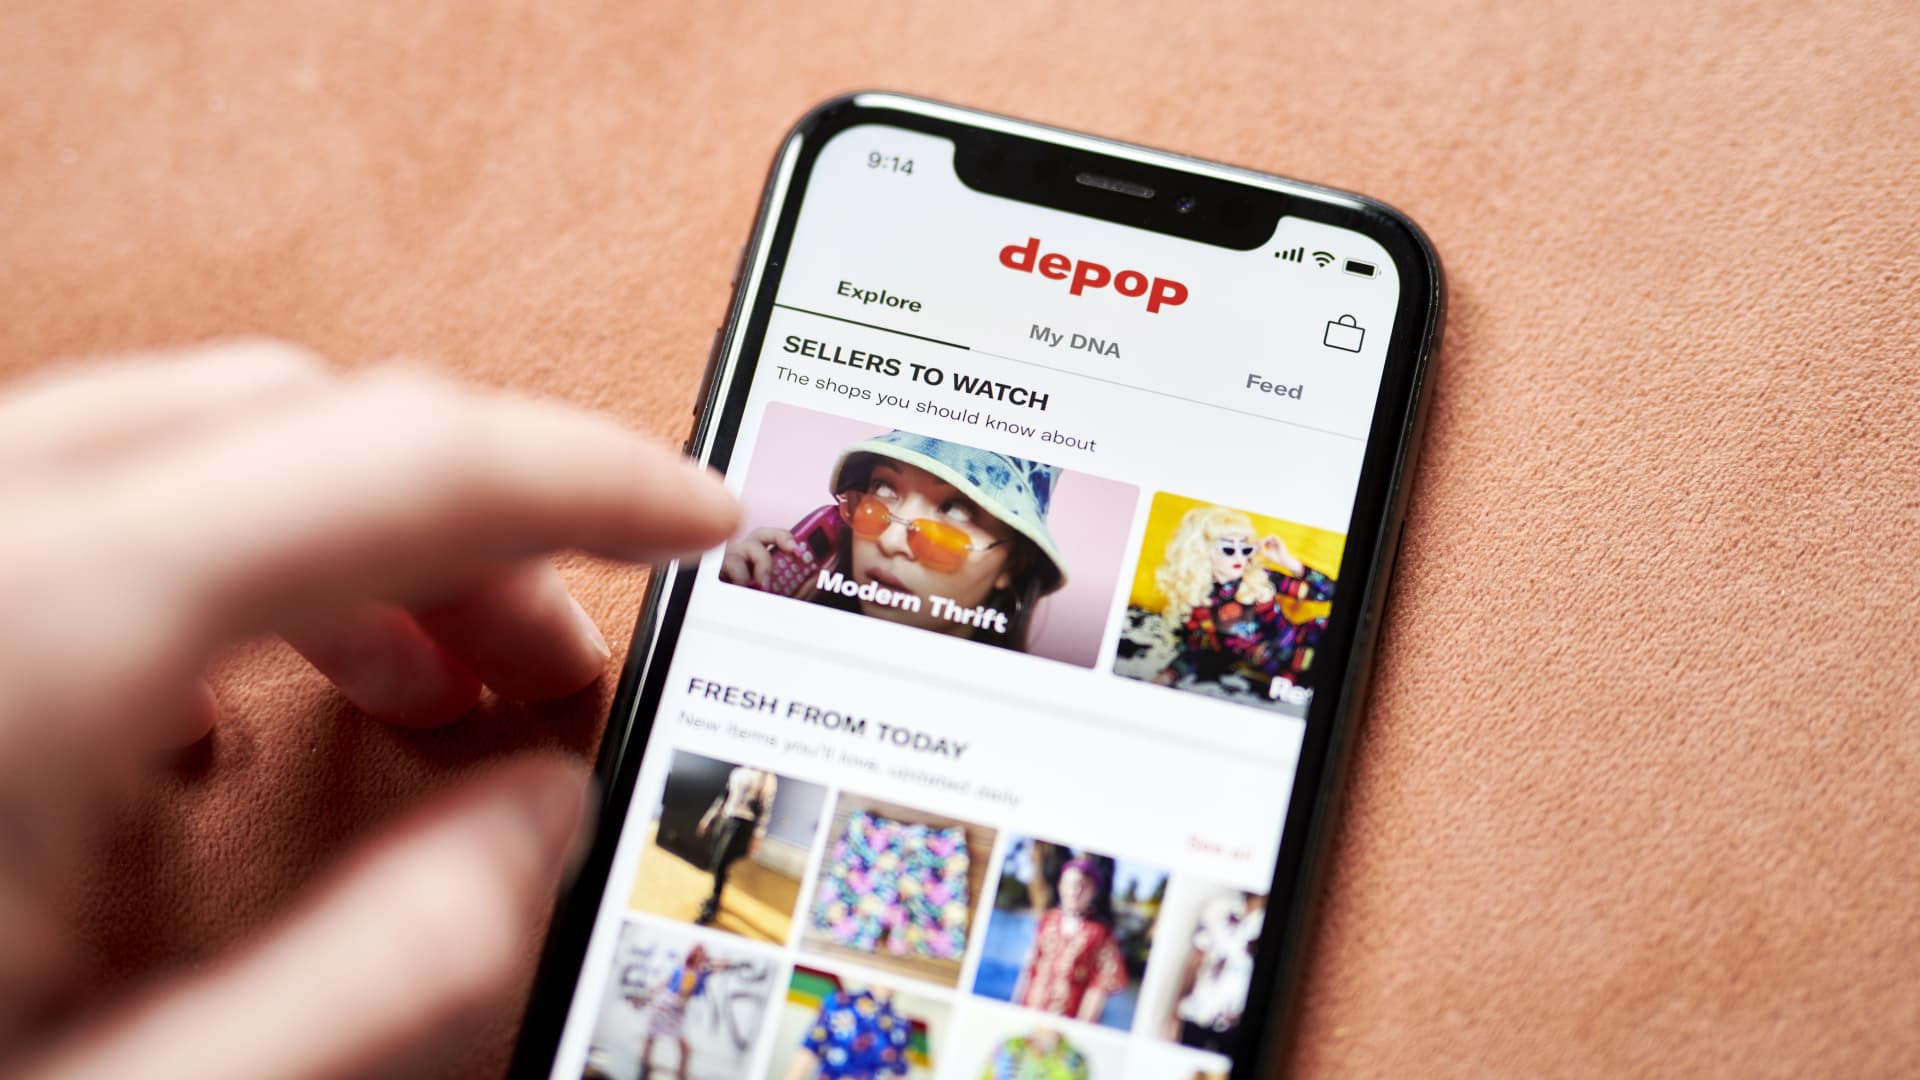 Secondhand resale is getting cutthroat as platforms like Depop and Poshmark boom